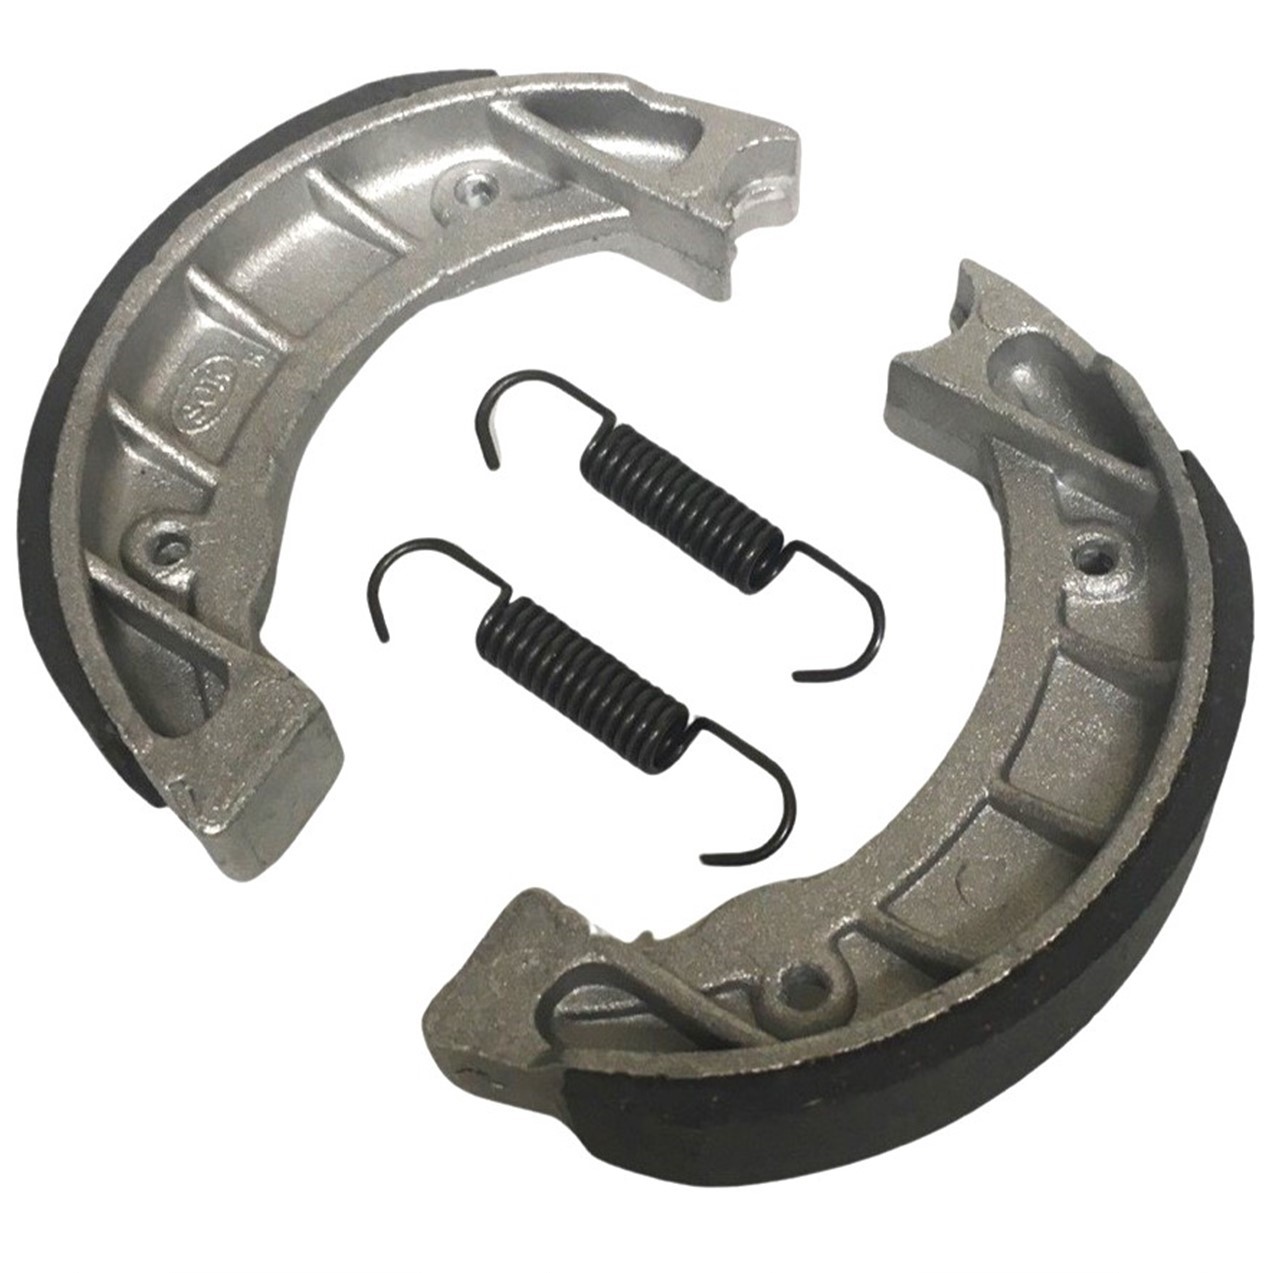 Brake Shoes OD=100x20mm Fits Some Tomos Revivals, ATVs, Scooters